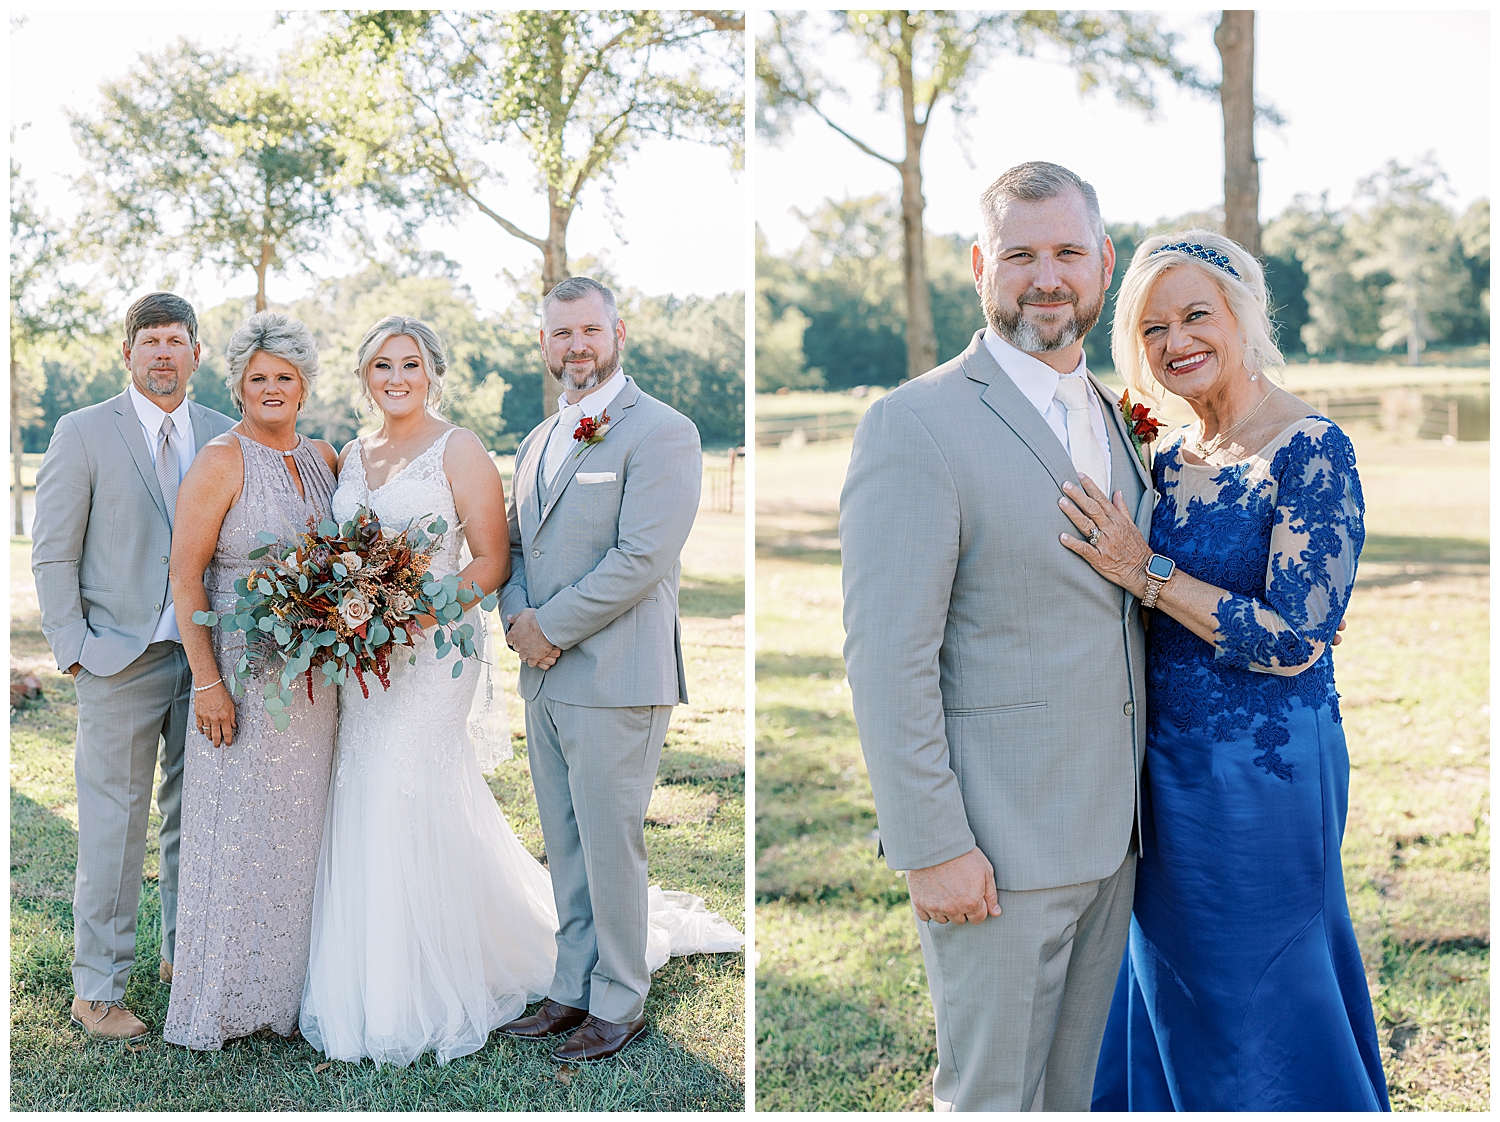 Juliann Riggs Photography captures family formals.